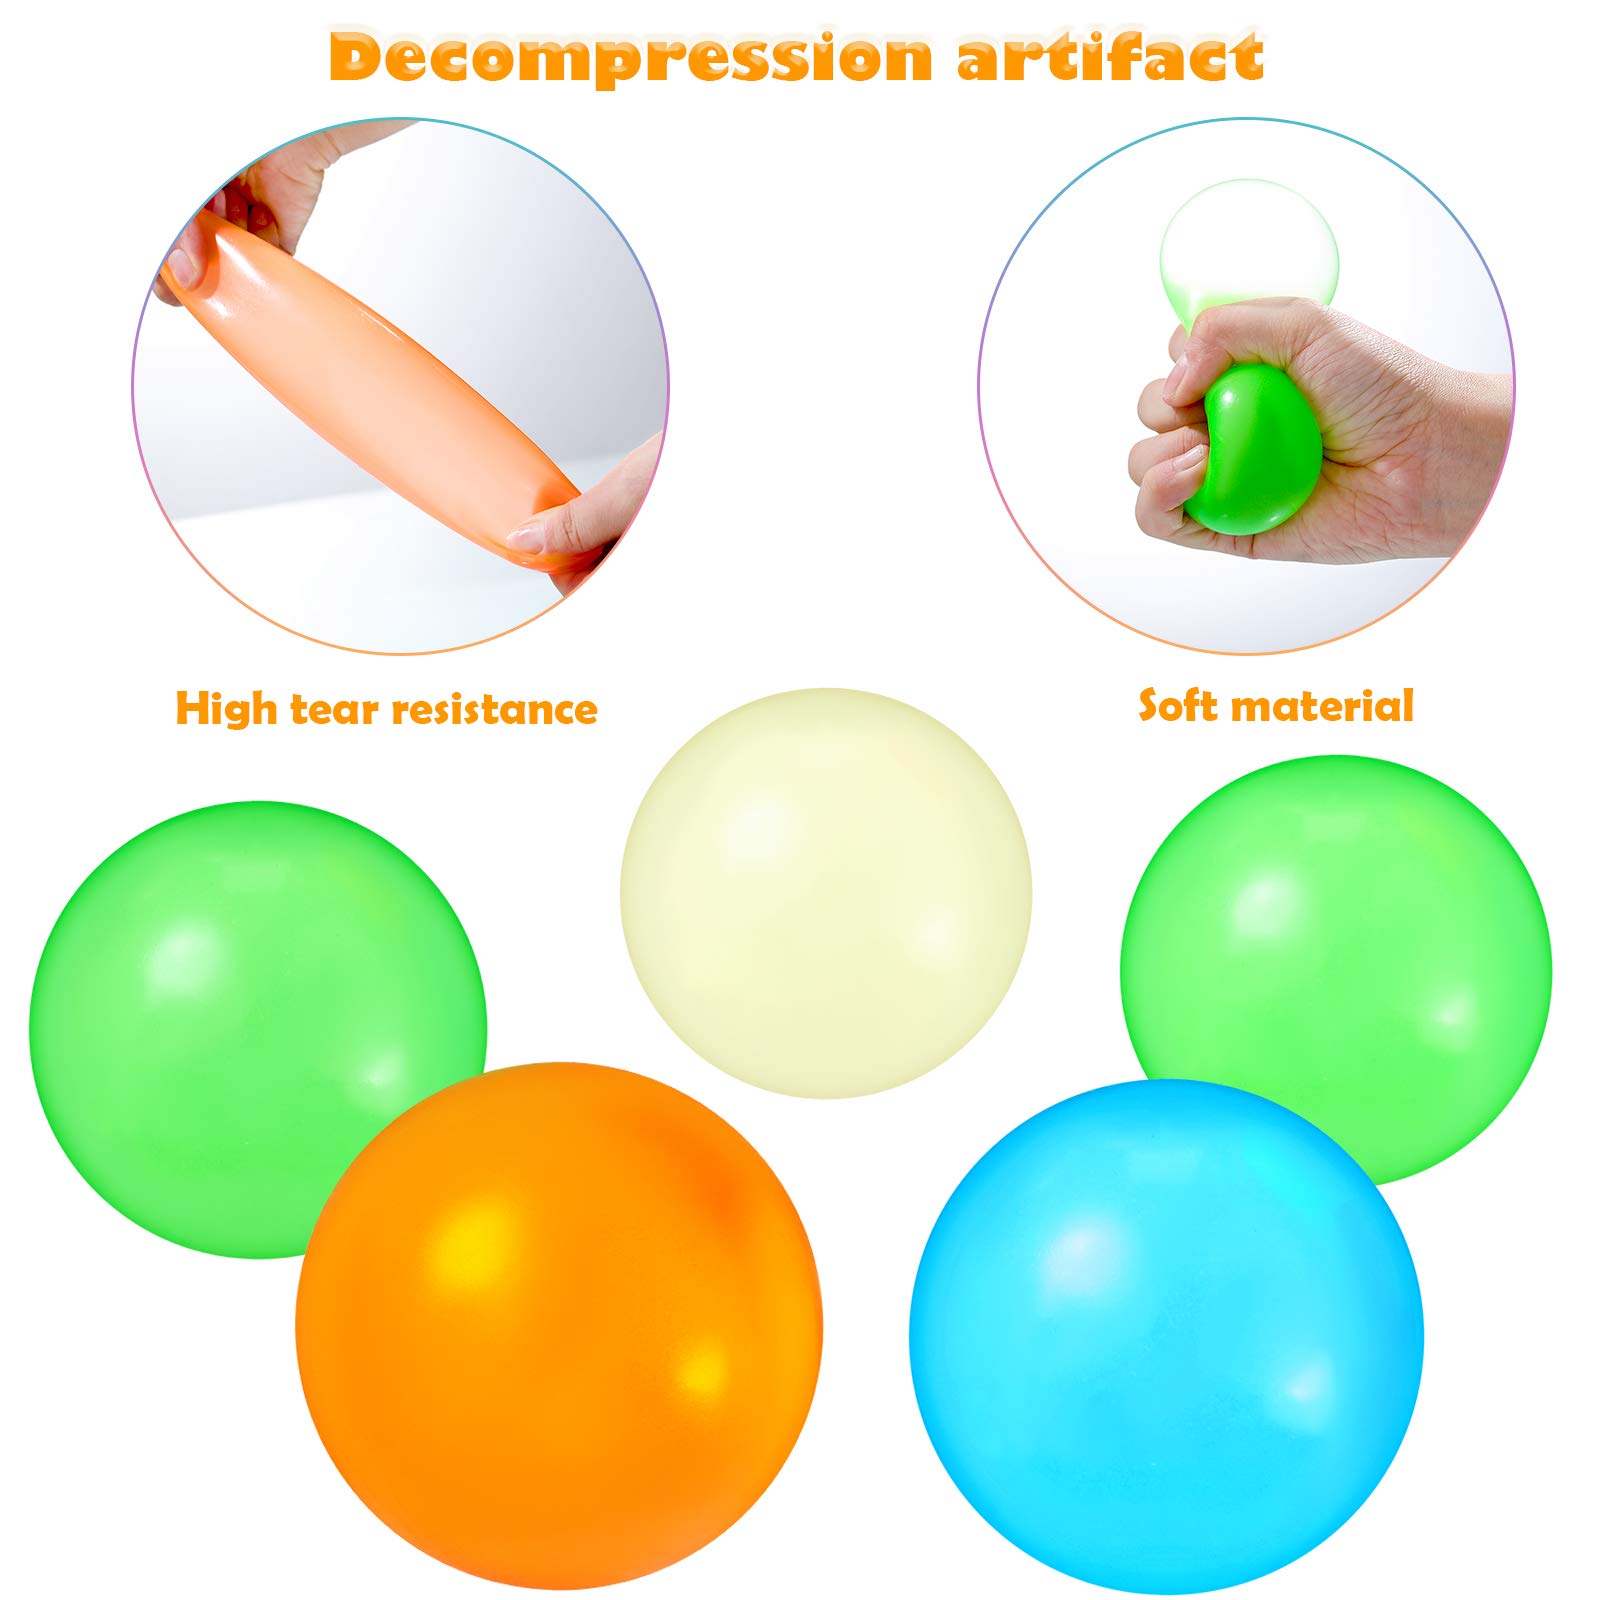 8 Pieces Glow in the Dark Stress Balls Ceiling Balls Sticky Balls That Stick to the Ceiling Glowing Balls for Relax Toy Teens and Adults (White, Blue, Orange, Green,2.6 Inches)